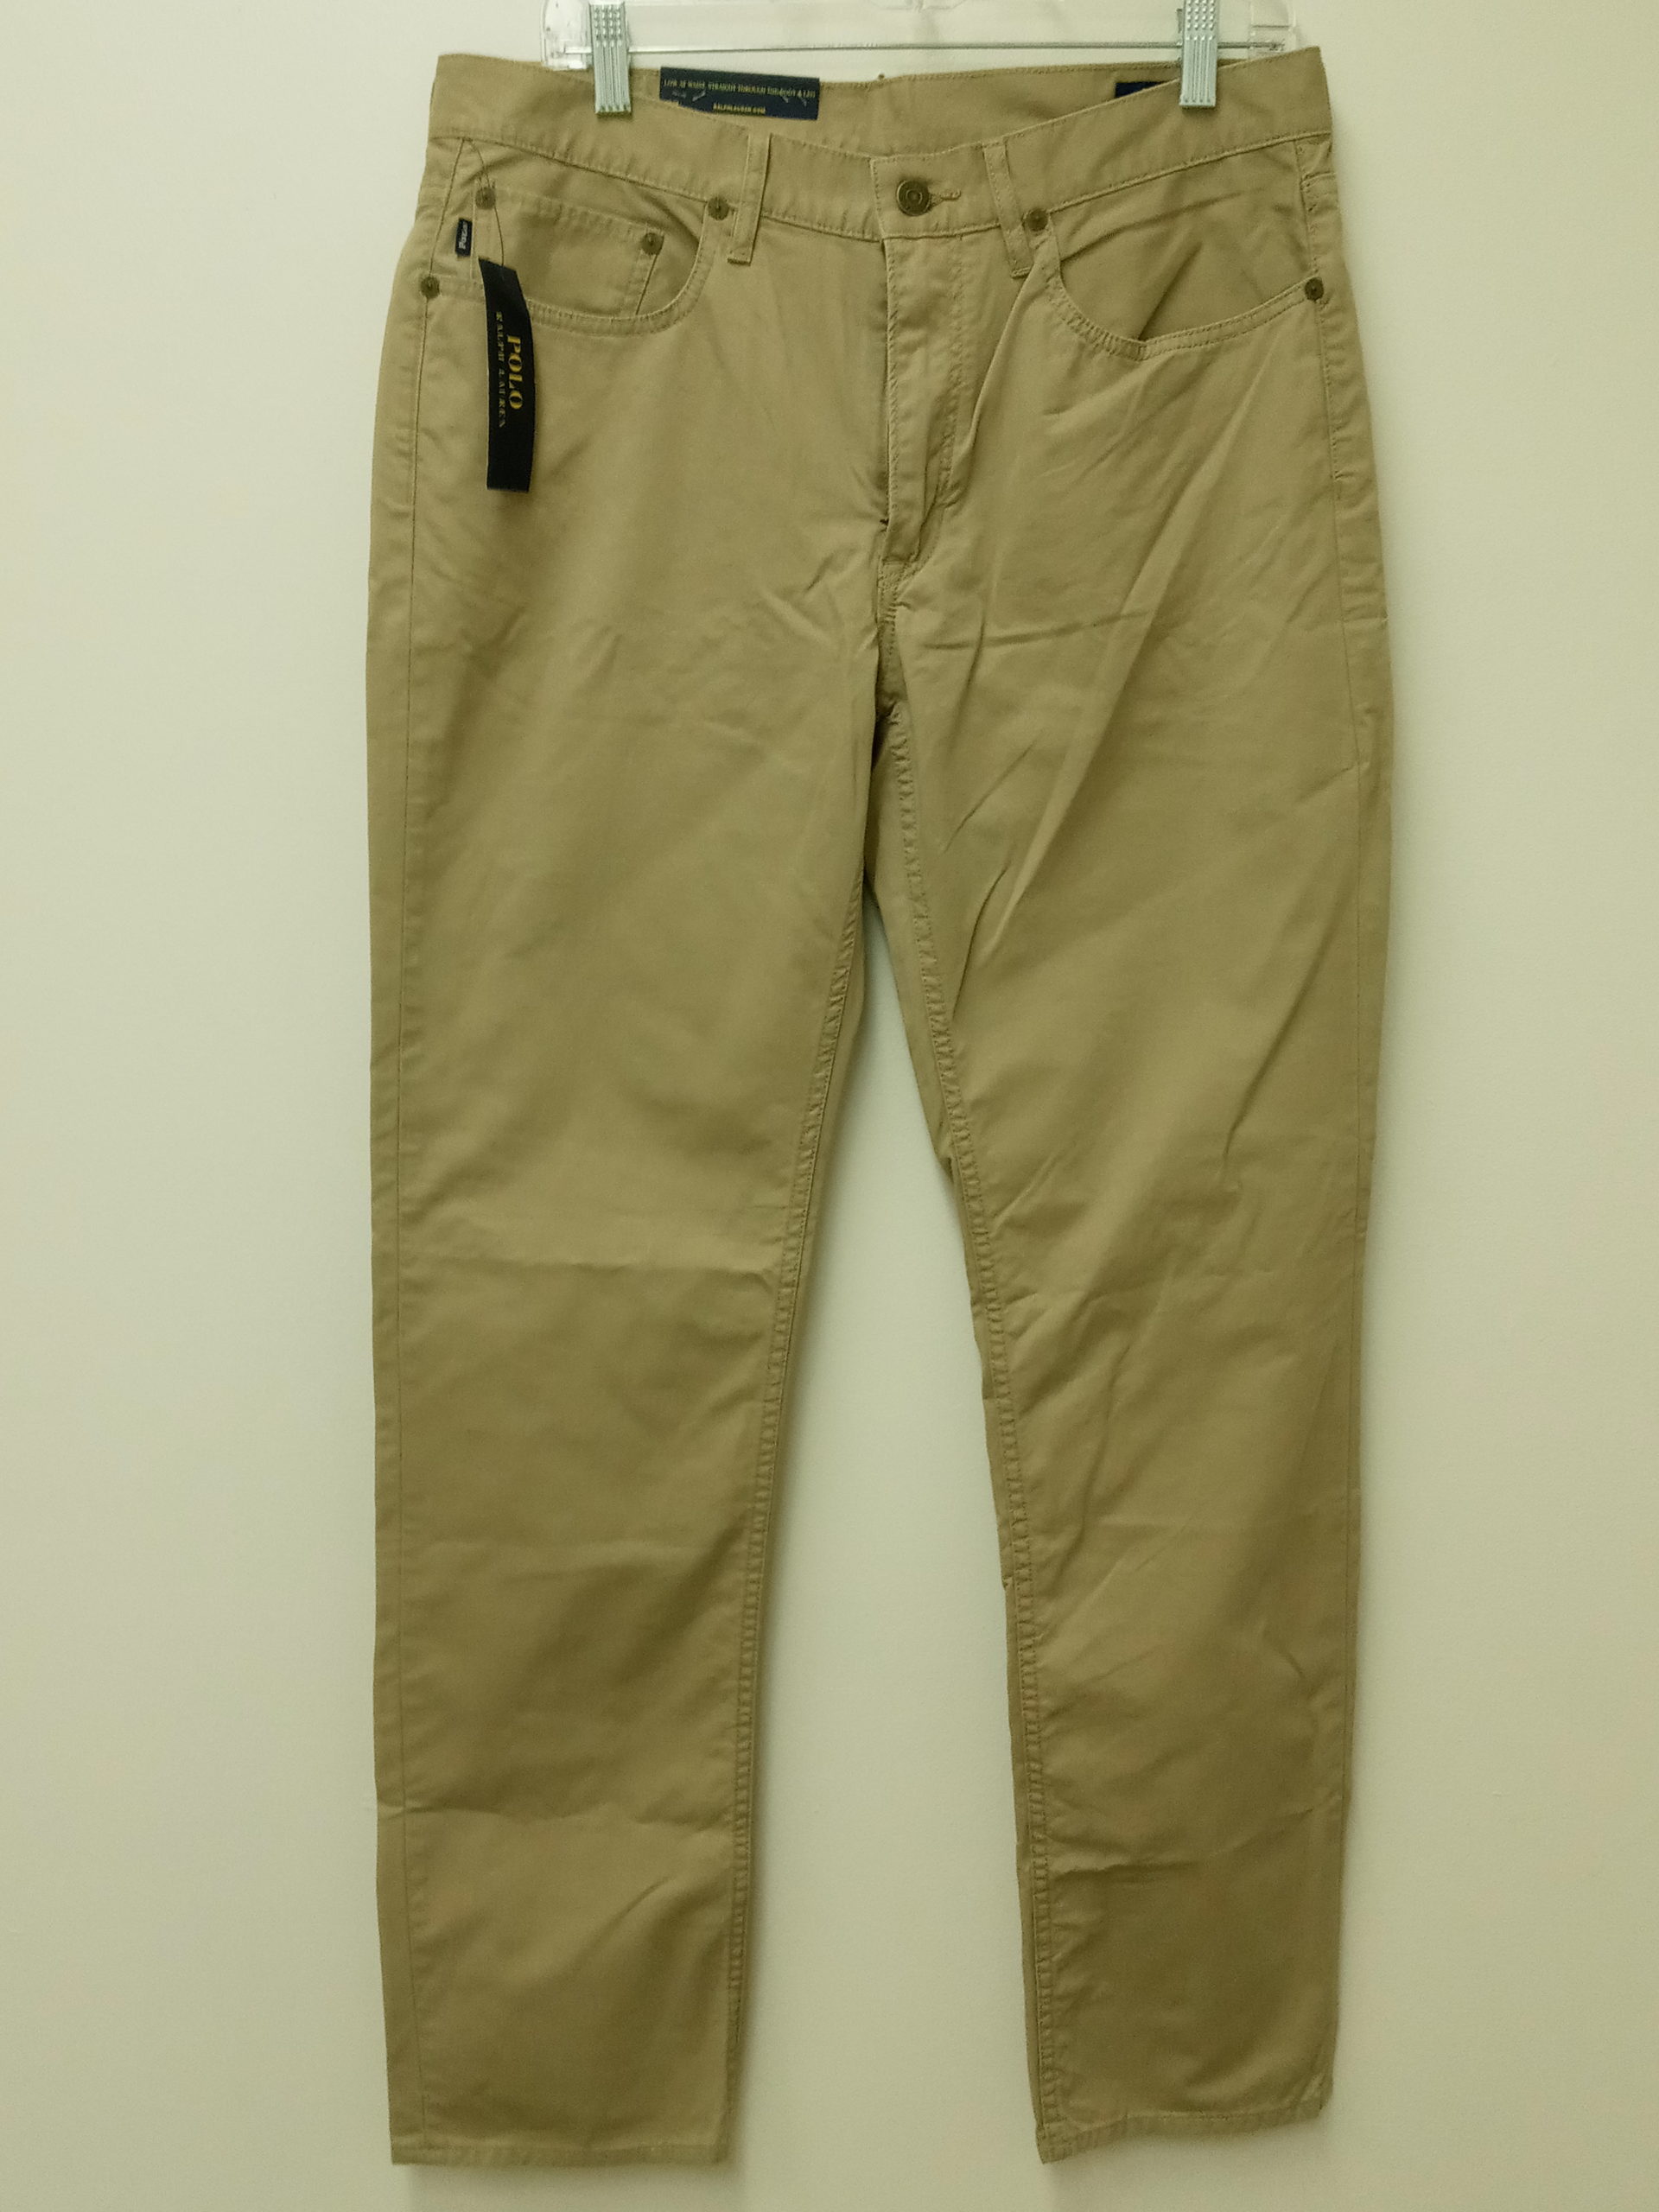 Men's POLO Ralph Lauren Stretch Slim Fit Boating Khaki Pants 32 x 32 -  Rescue Missions Ministries Thrift Store